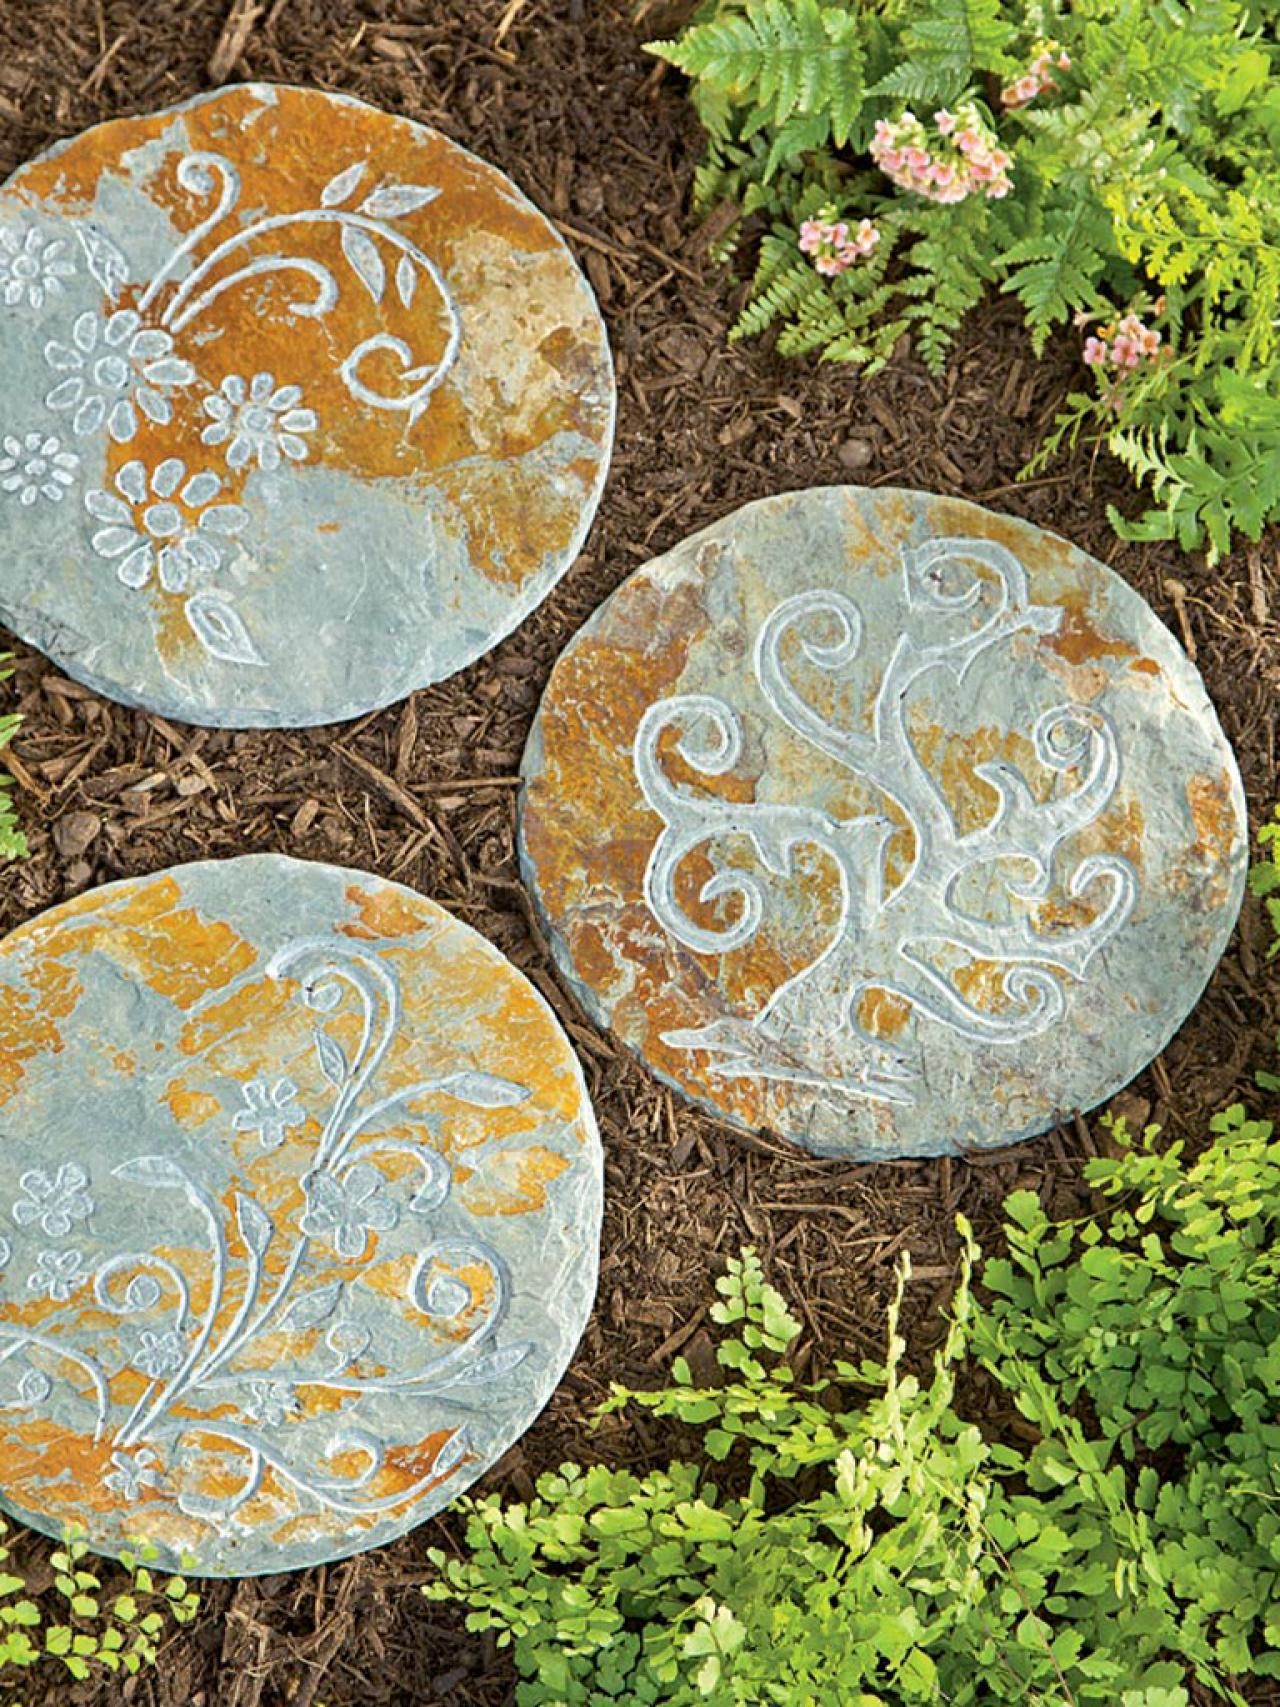 Inspiring Stepping Stones Pathway Ideas For Your Garden